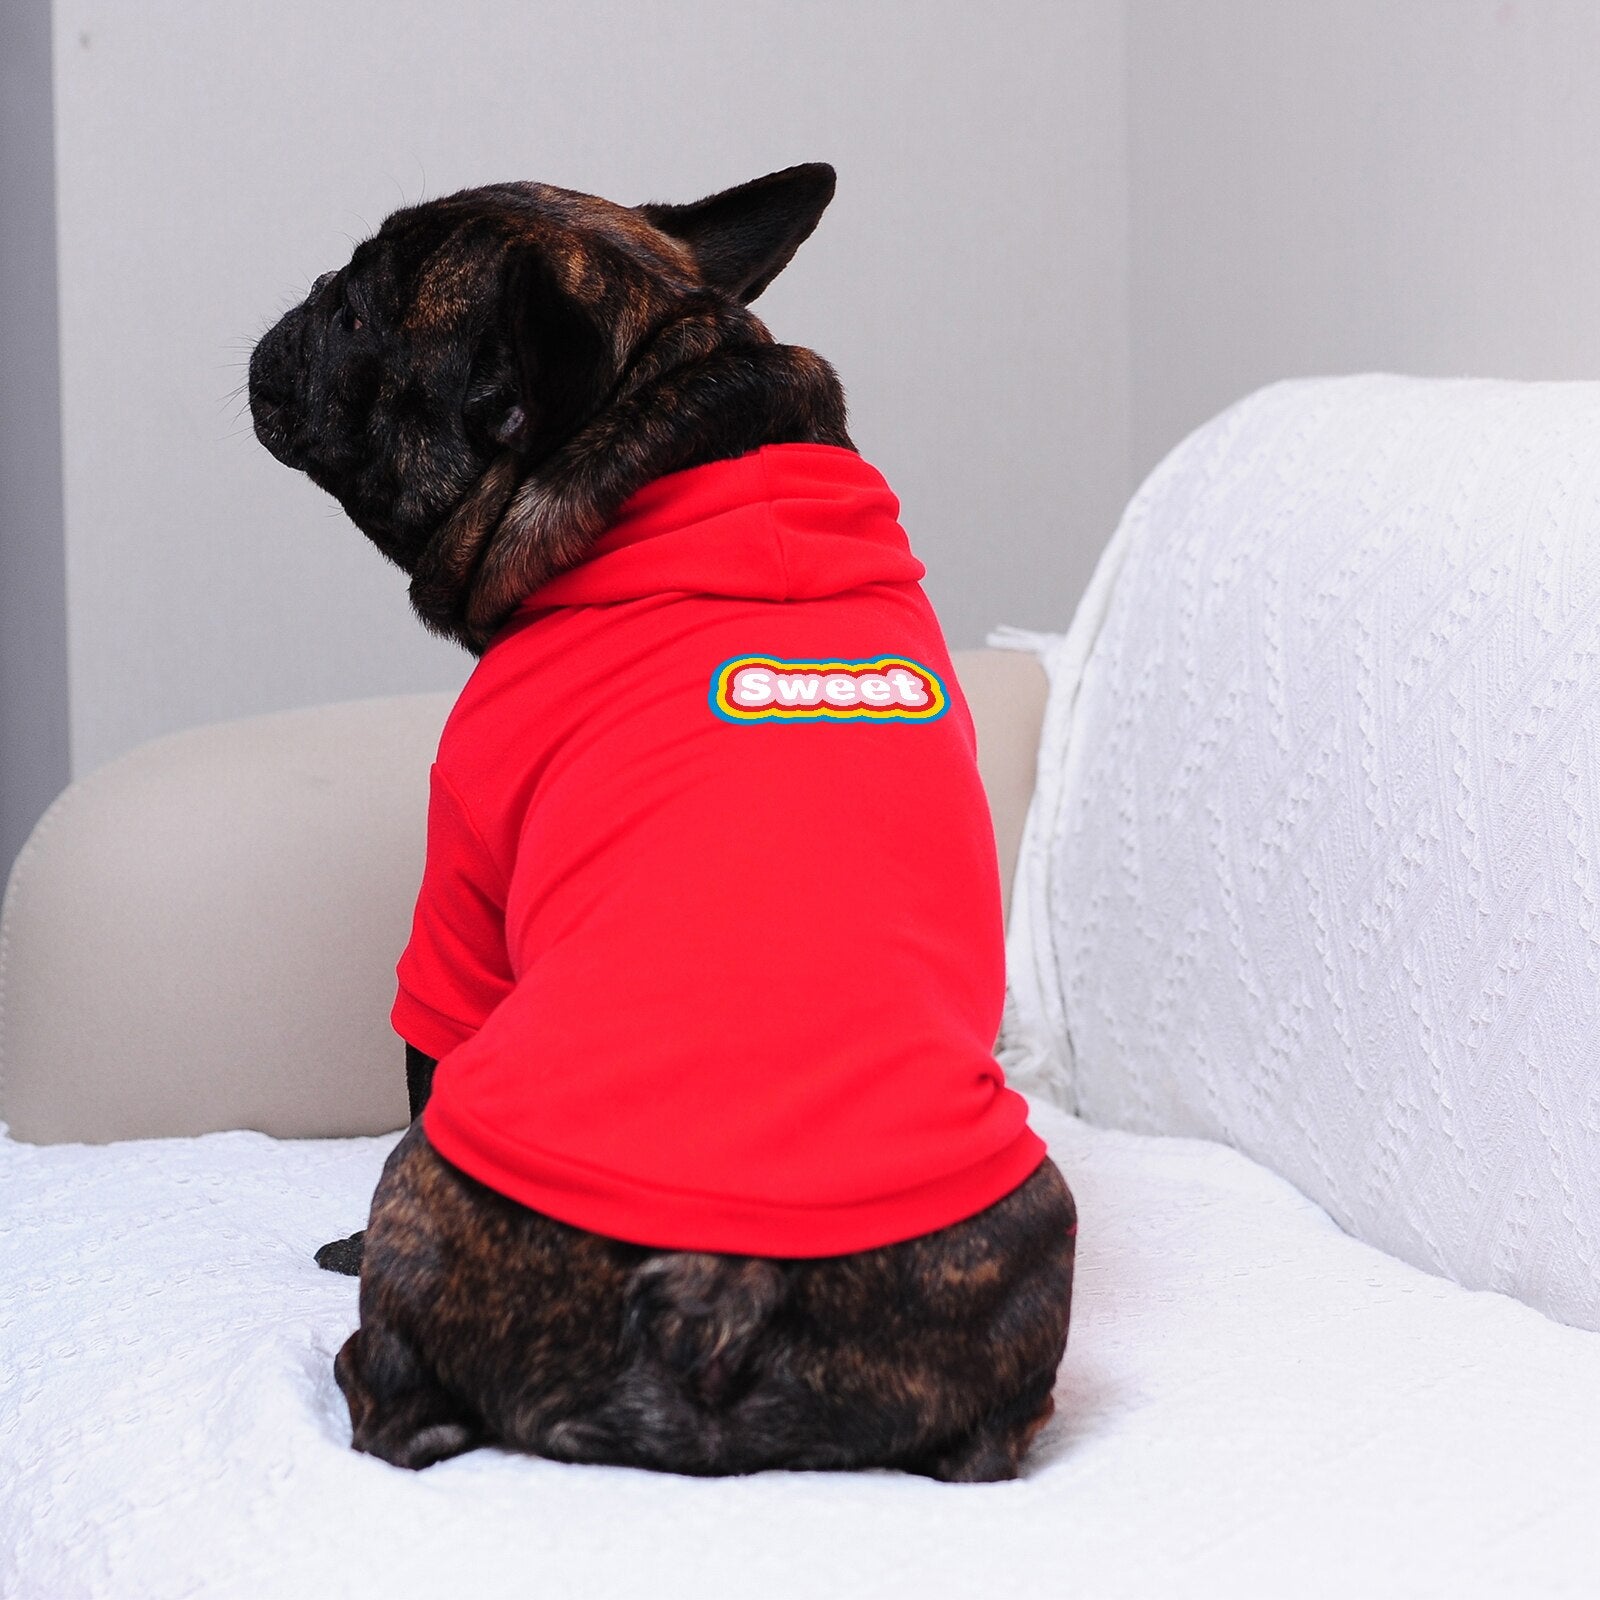 2022 New Dog Printed Hoodie ’Sweet‘ Letter, Stripe White Red Big Hood and Leash Hole, High Quality and Durable